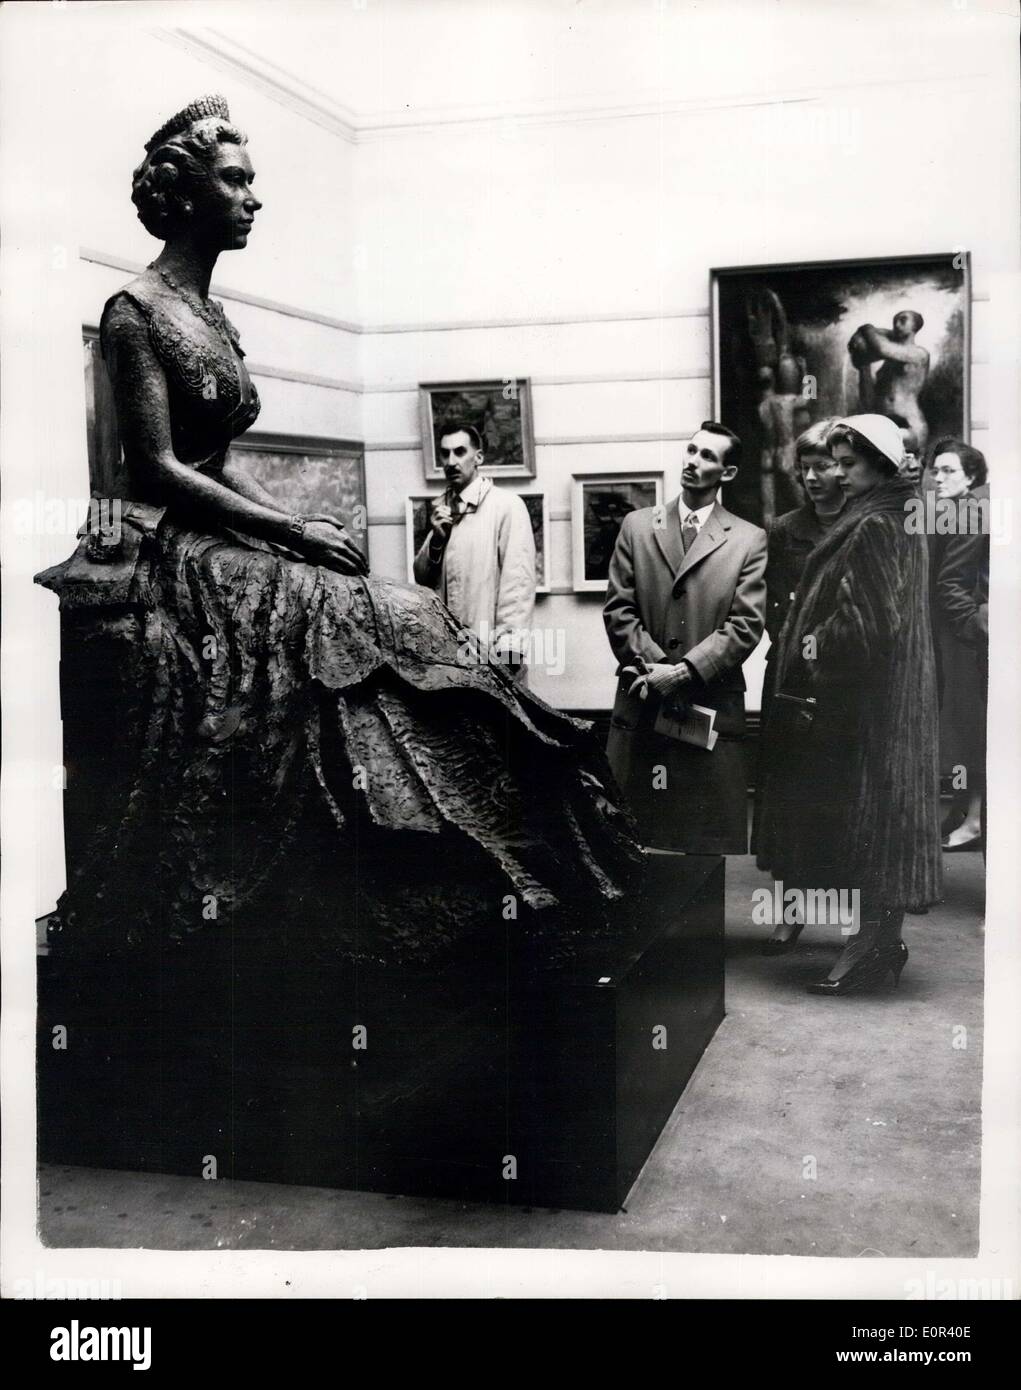 Nov. 15, 1957 - Private View of Regal Society of British Artists Exhibition - A Private View was held this morning at the Suffolk Street Galleries - of the Royal Society of British Artists' Exhibition. Keystone Photo Shows:- Visitors to the Exhibition - looking at the Sttes of the Queen - Created by Nigerian Sculpter - Mr. ENWOING. Stock Photo